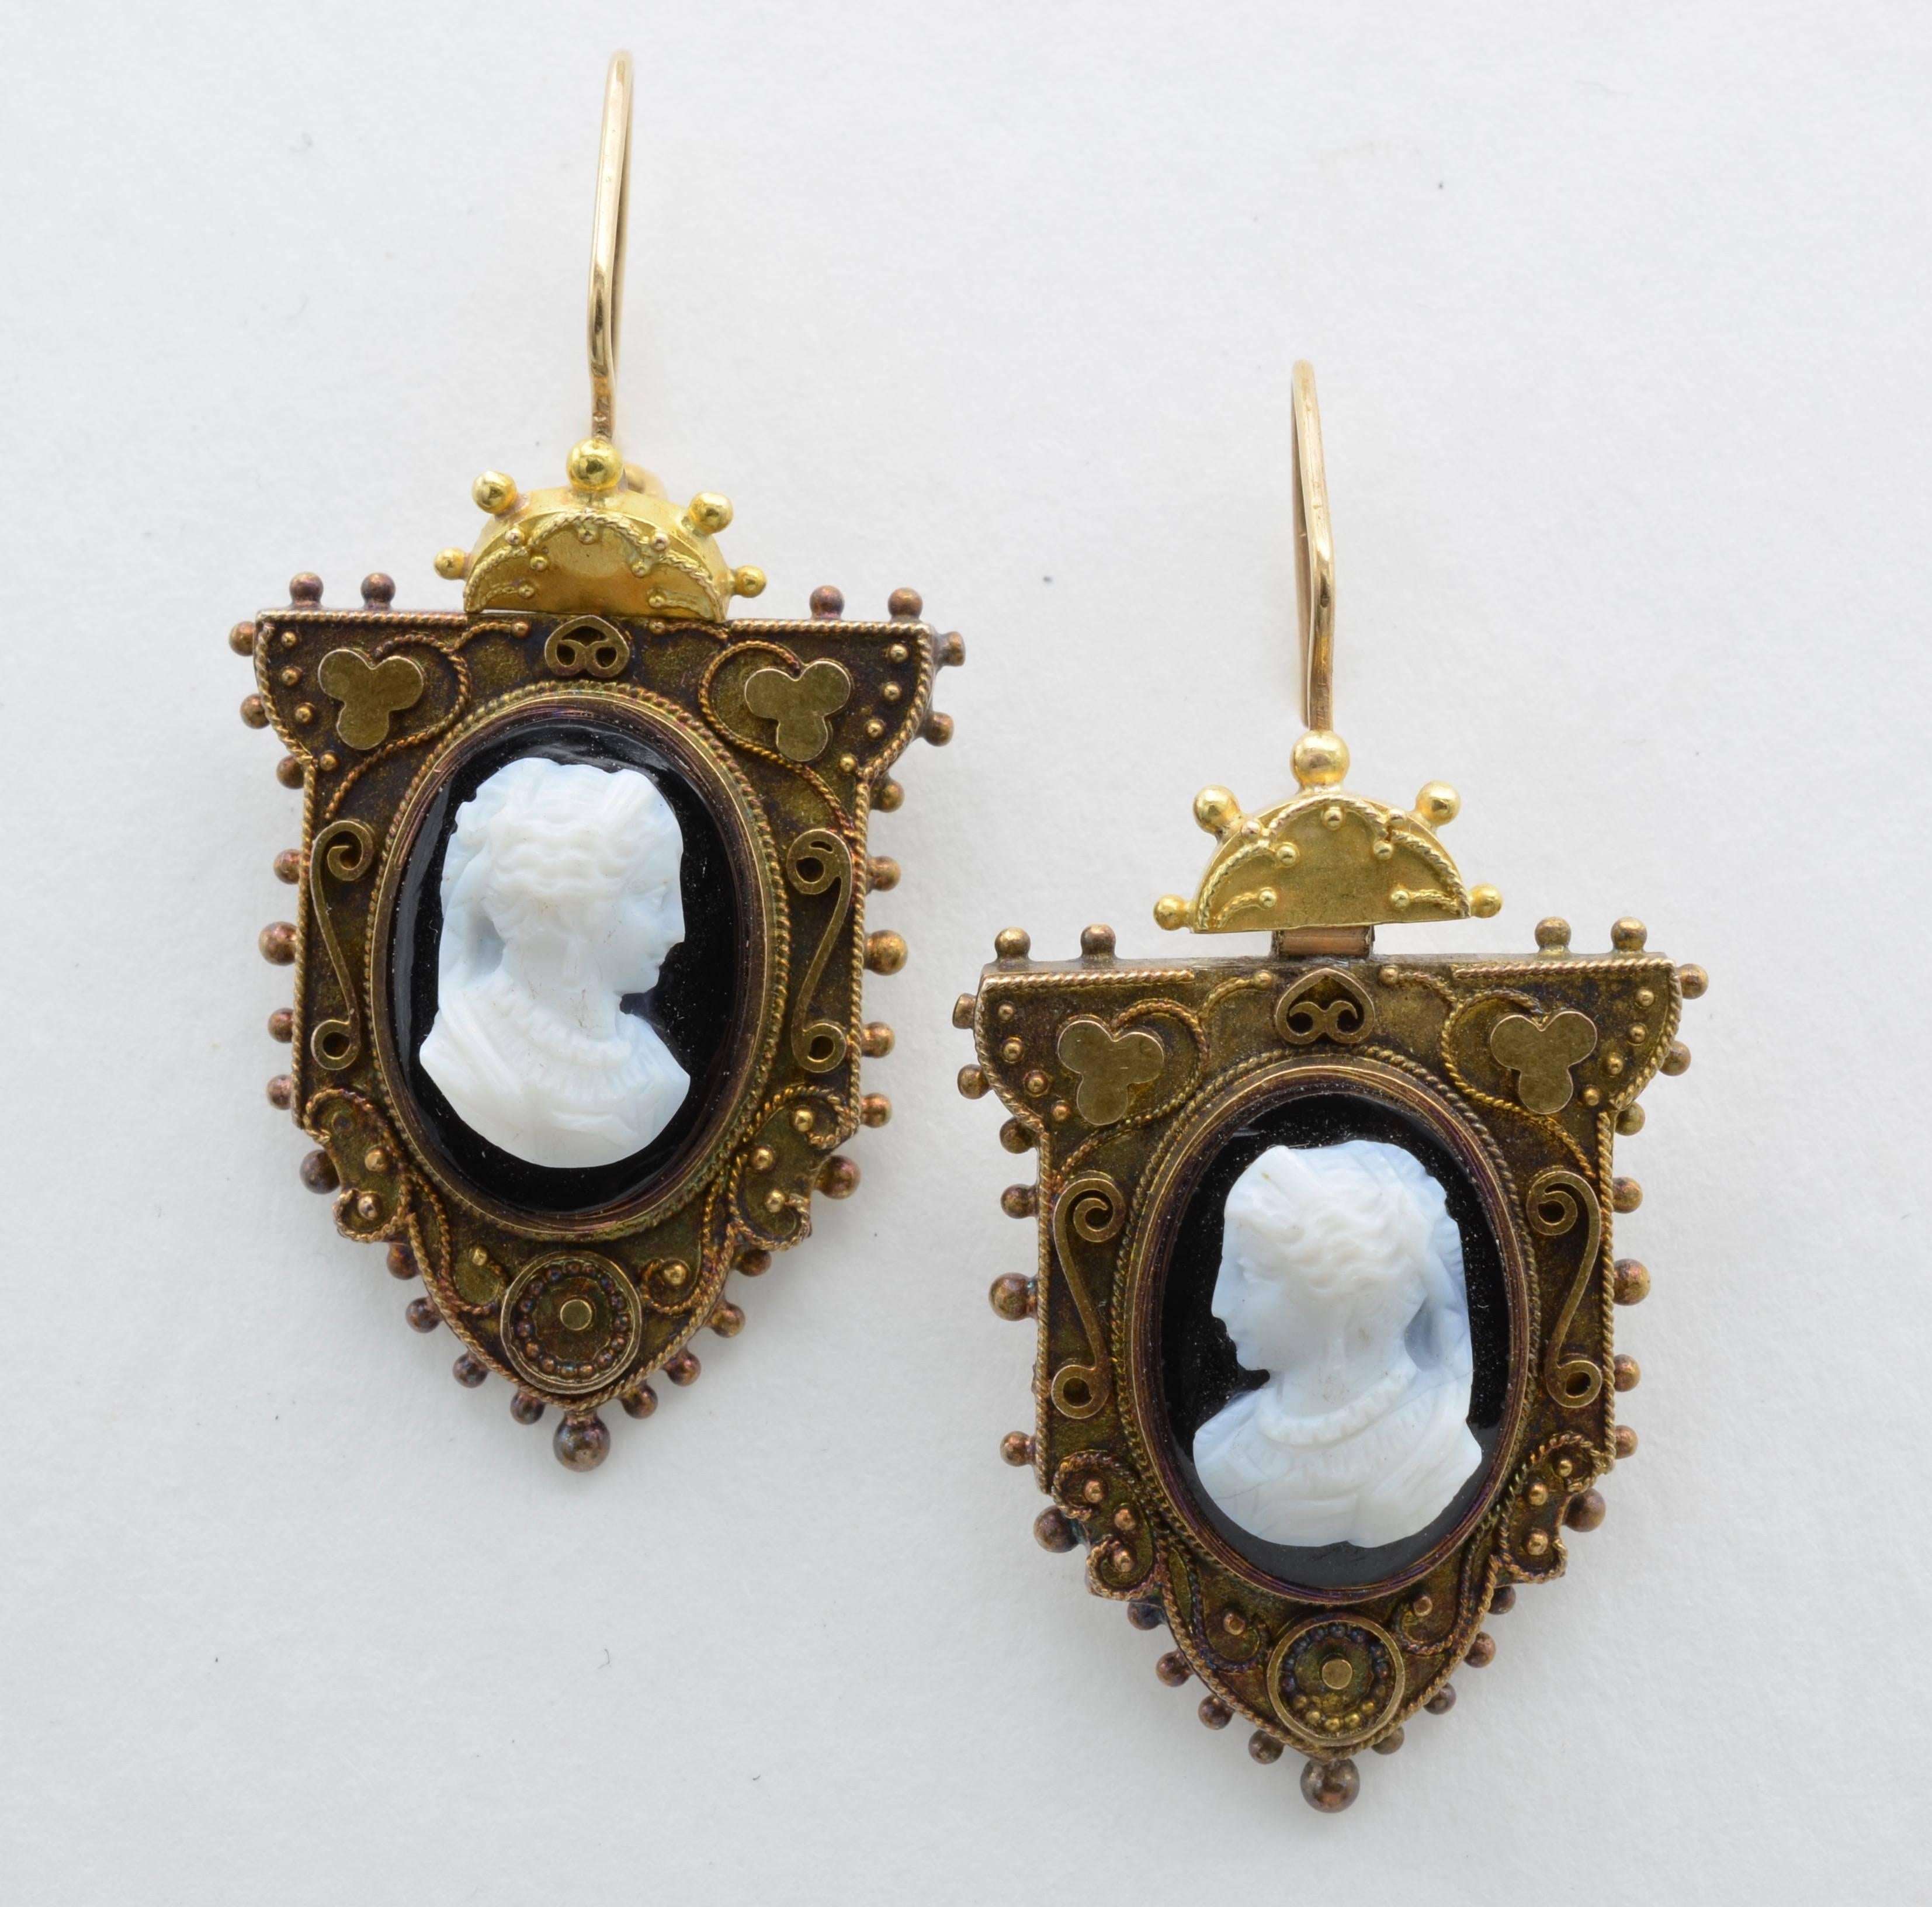 These stunning cameo and gold earrings are intricately detailed with spirals and swirls carved with the profiles of regal women. Antique and from the Victorian Era, these dangling beauties have a sun-like top that hinge to the larger portrait